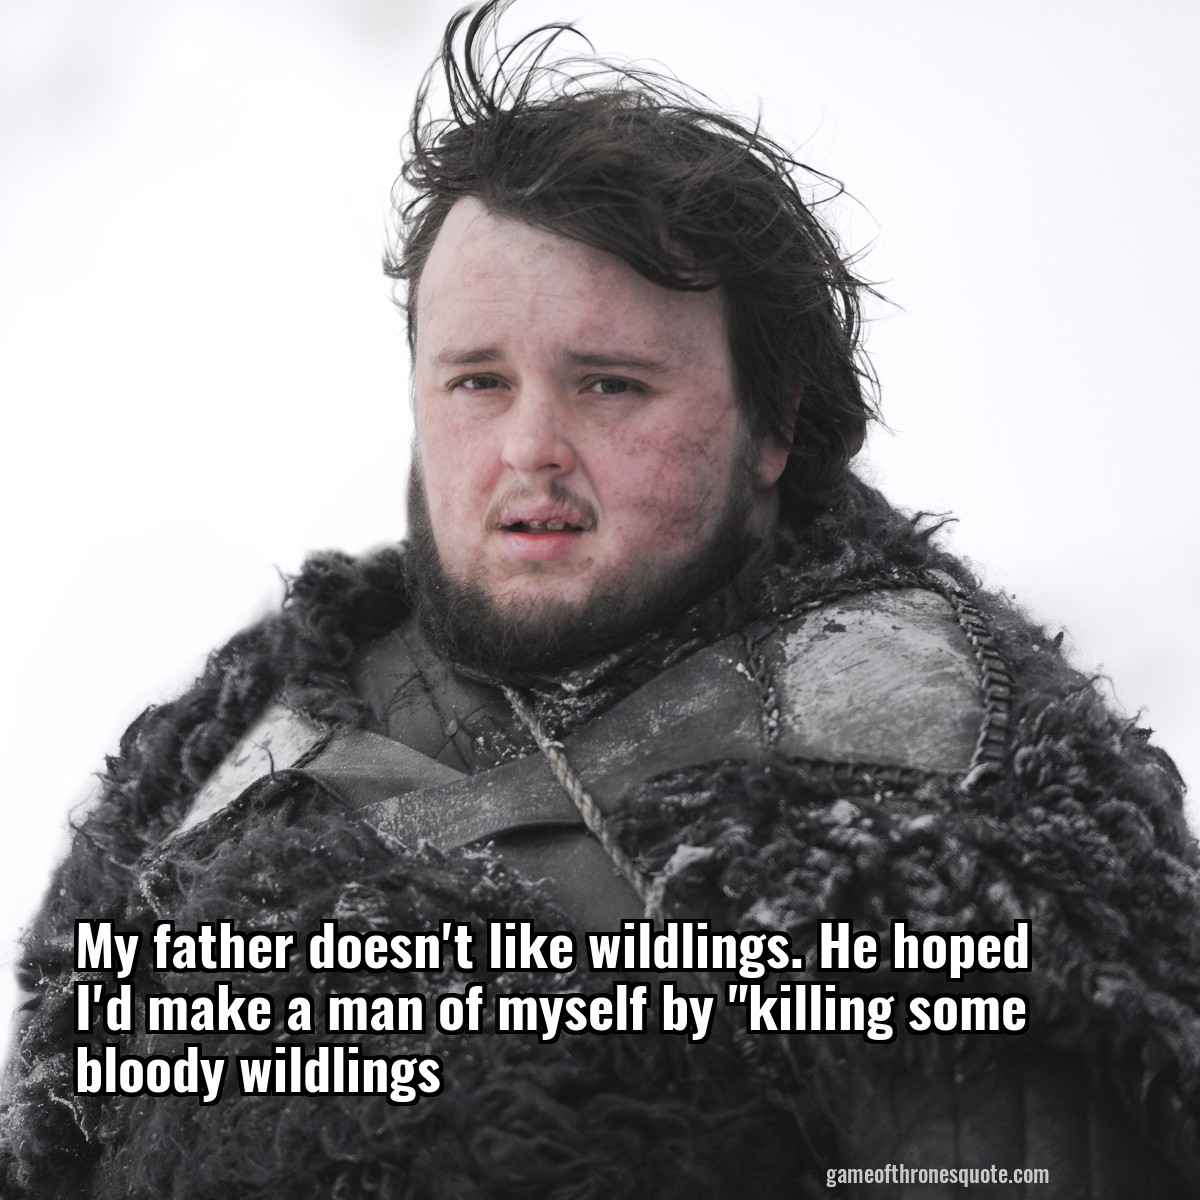 My father doesn't like wildlings. He hoped I'd make a man of myself by "killing some bloody wildlings